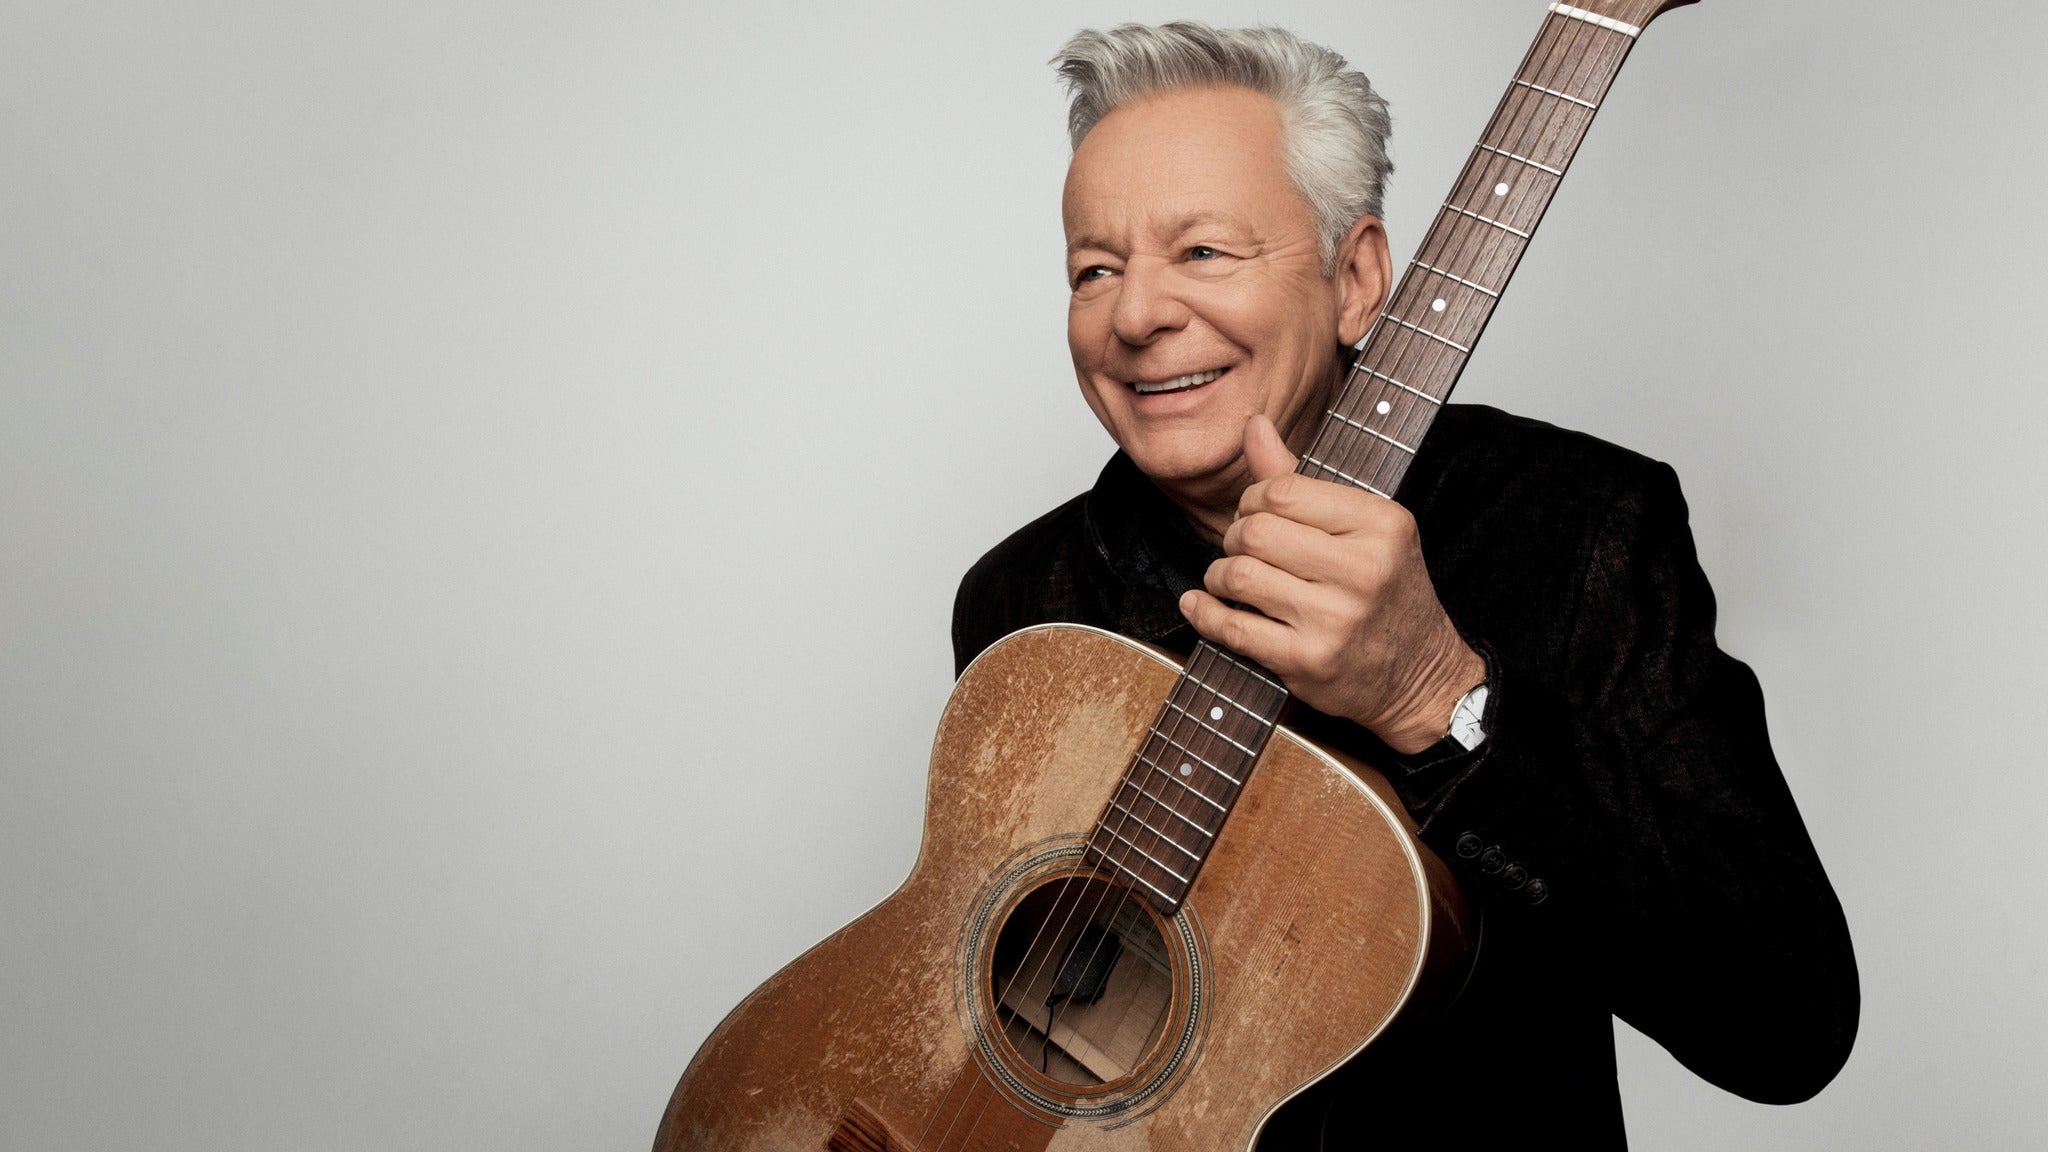 Tommy Emmanuel, CGP presale password for early tickets in Chattanooga